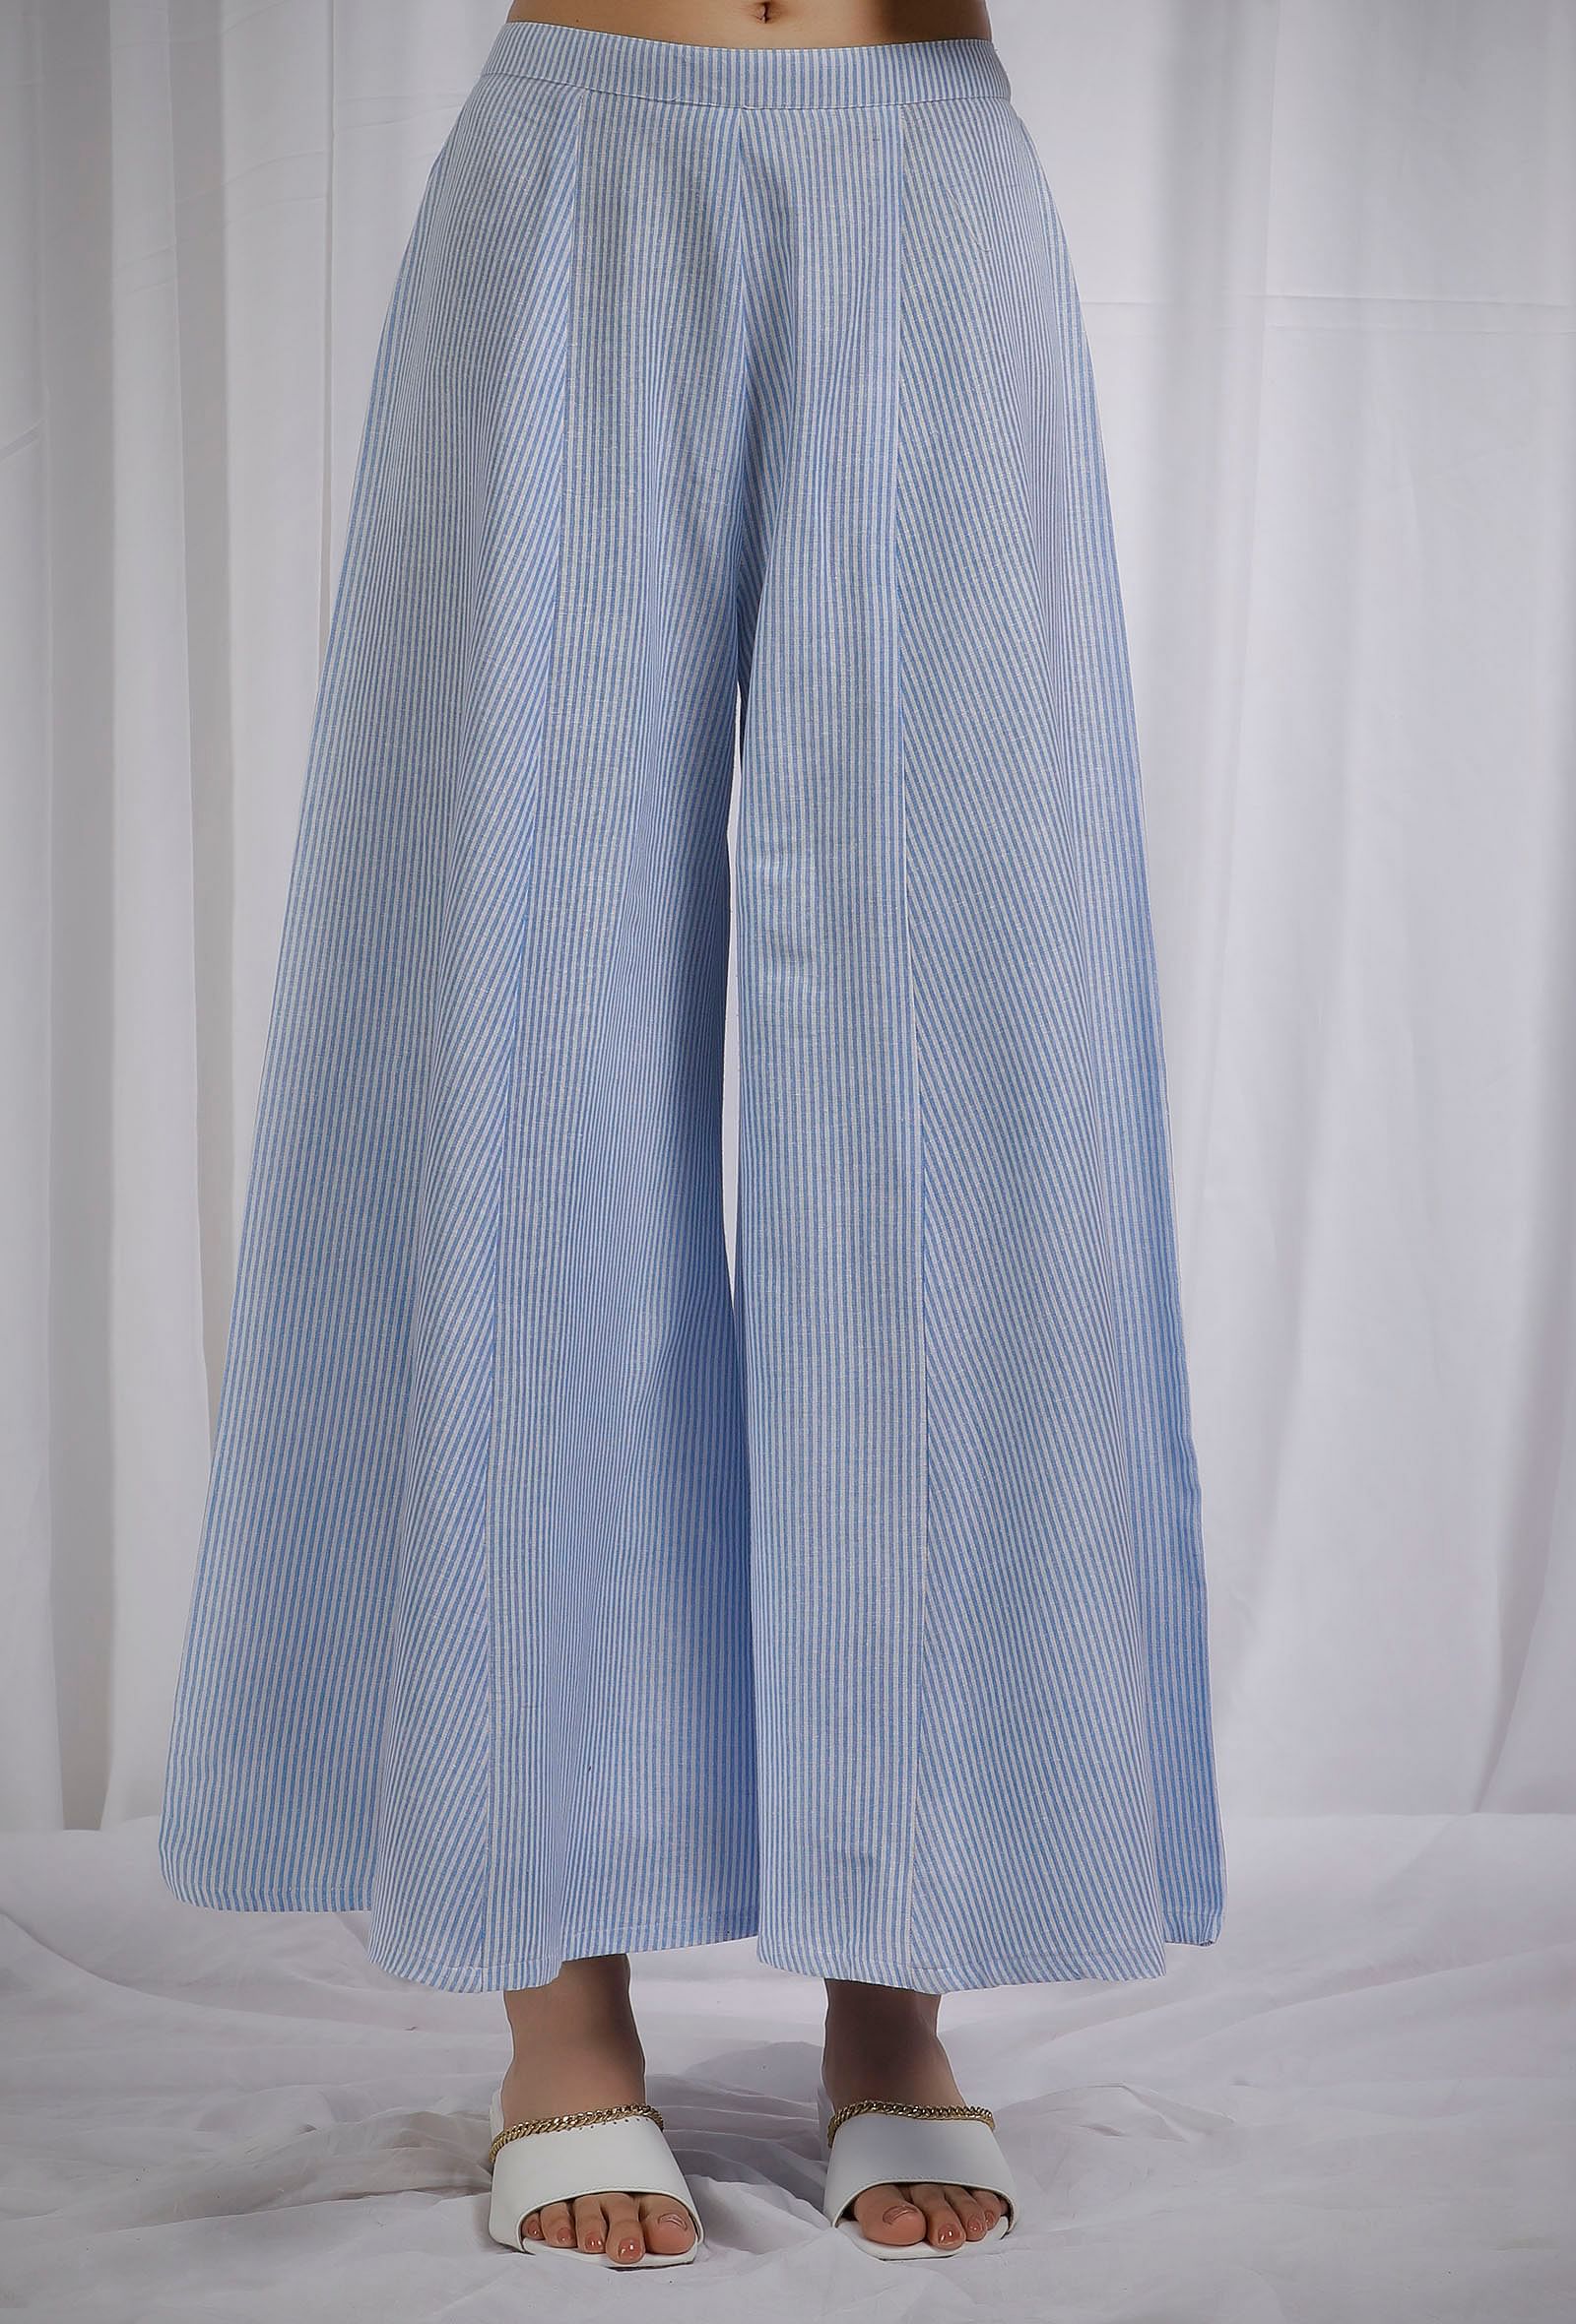 Buy Blue Hand Embroidered Cotton Striped Pants  VLVG22PT16BLUEVINT8   The loom